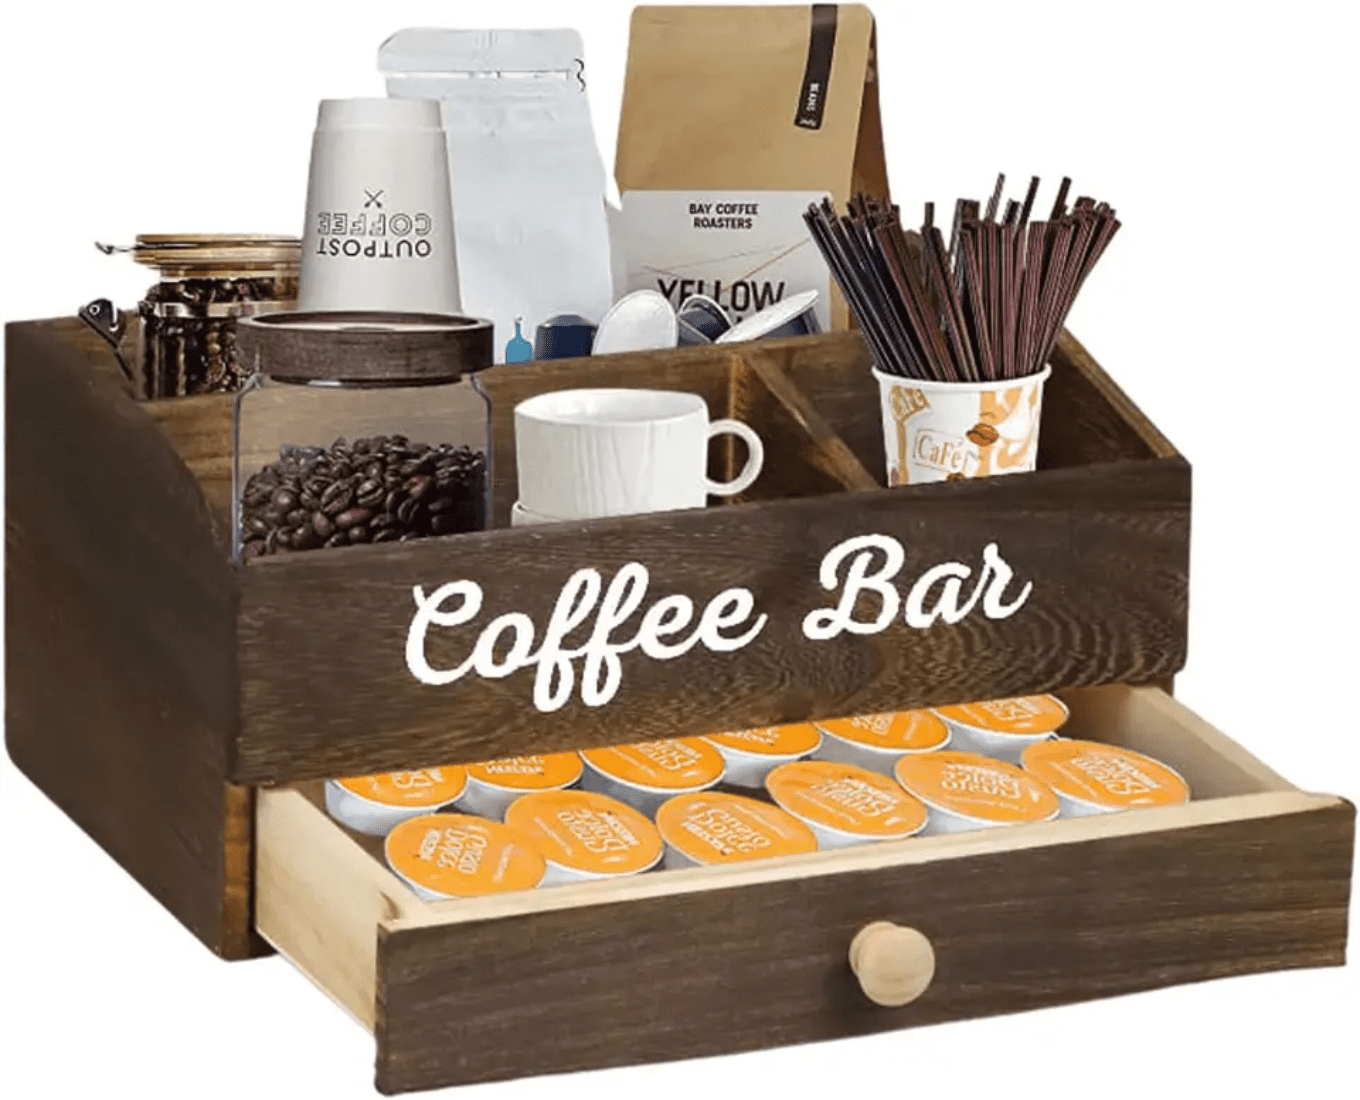 Coffee Bar Countertop Organizer and Coffee Station, Kitchen, Coffee Bar  Accessories - One Drawer, 3 Compartments 